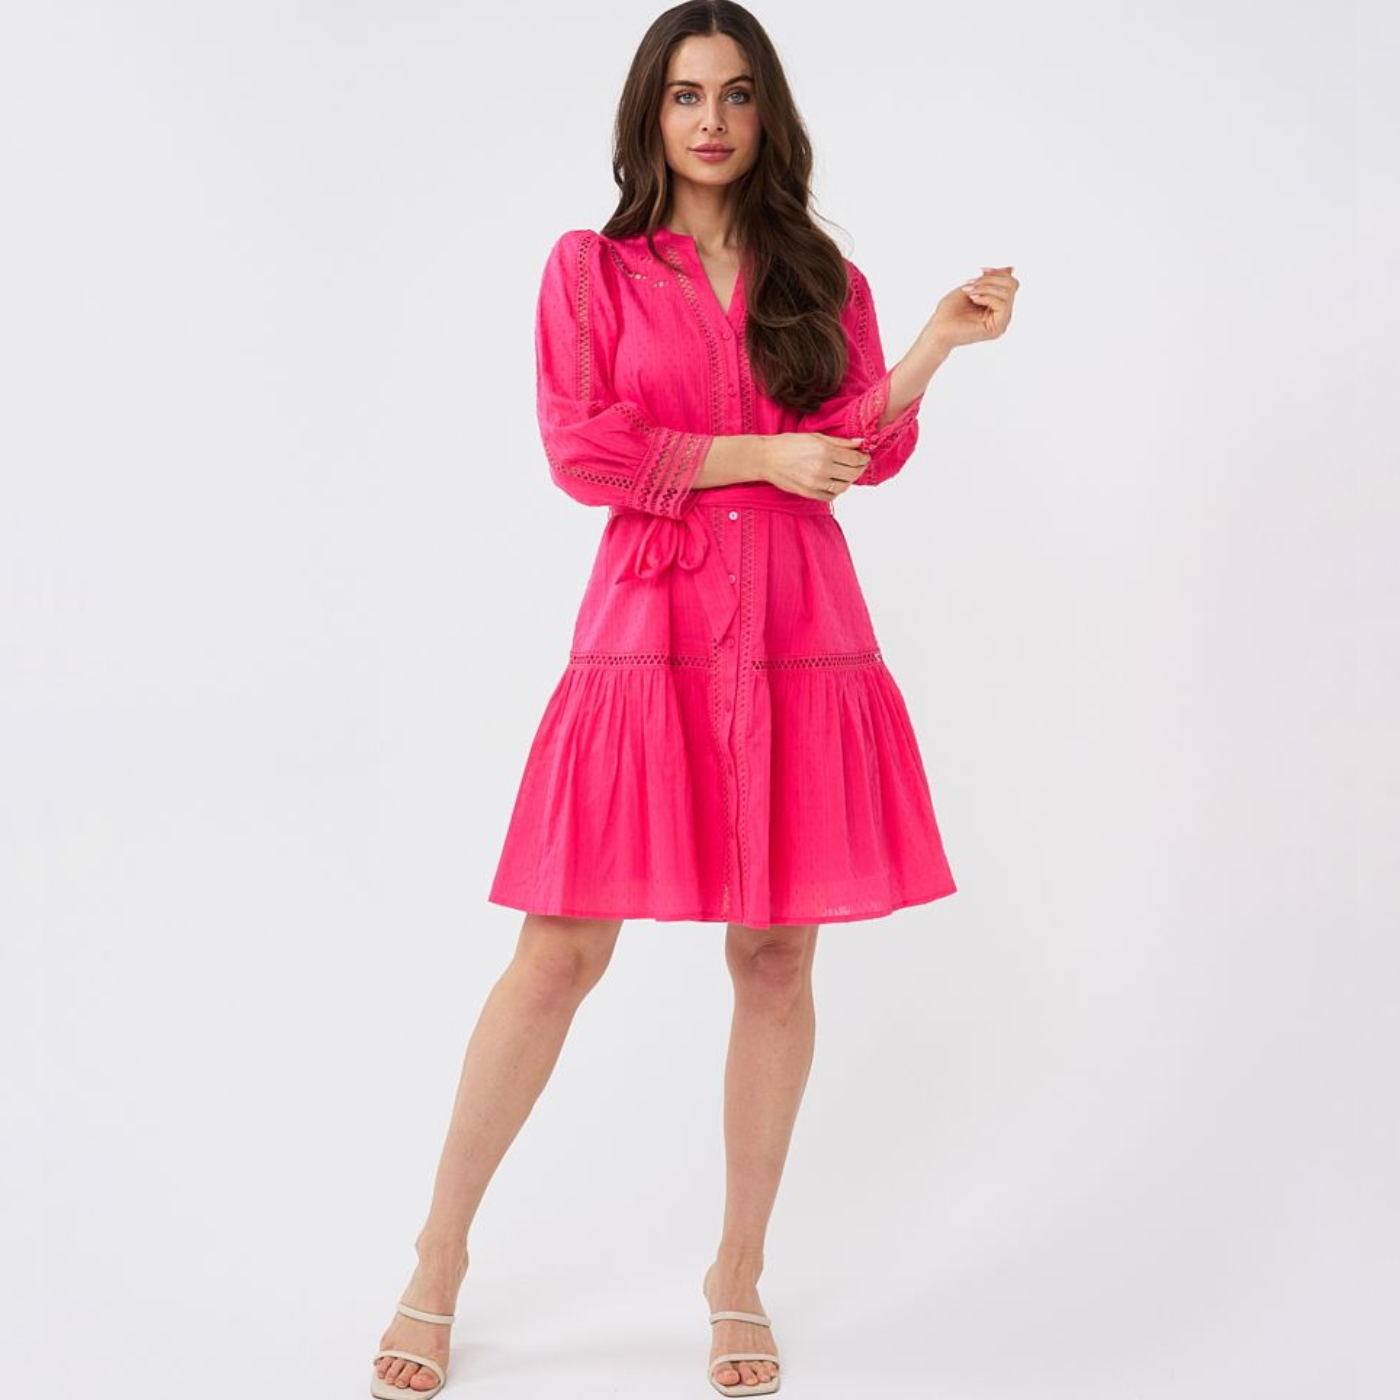 female model wearing esqualo lace dress in magenta colour looking at camera